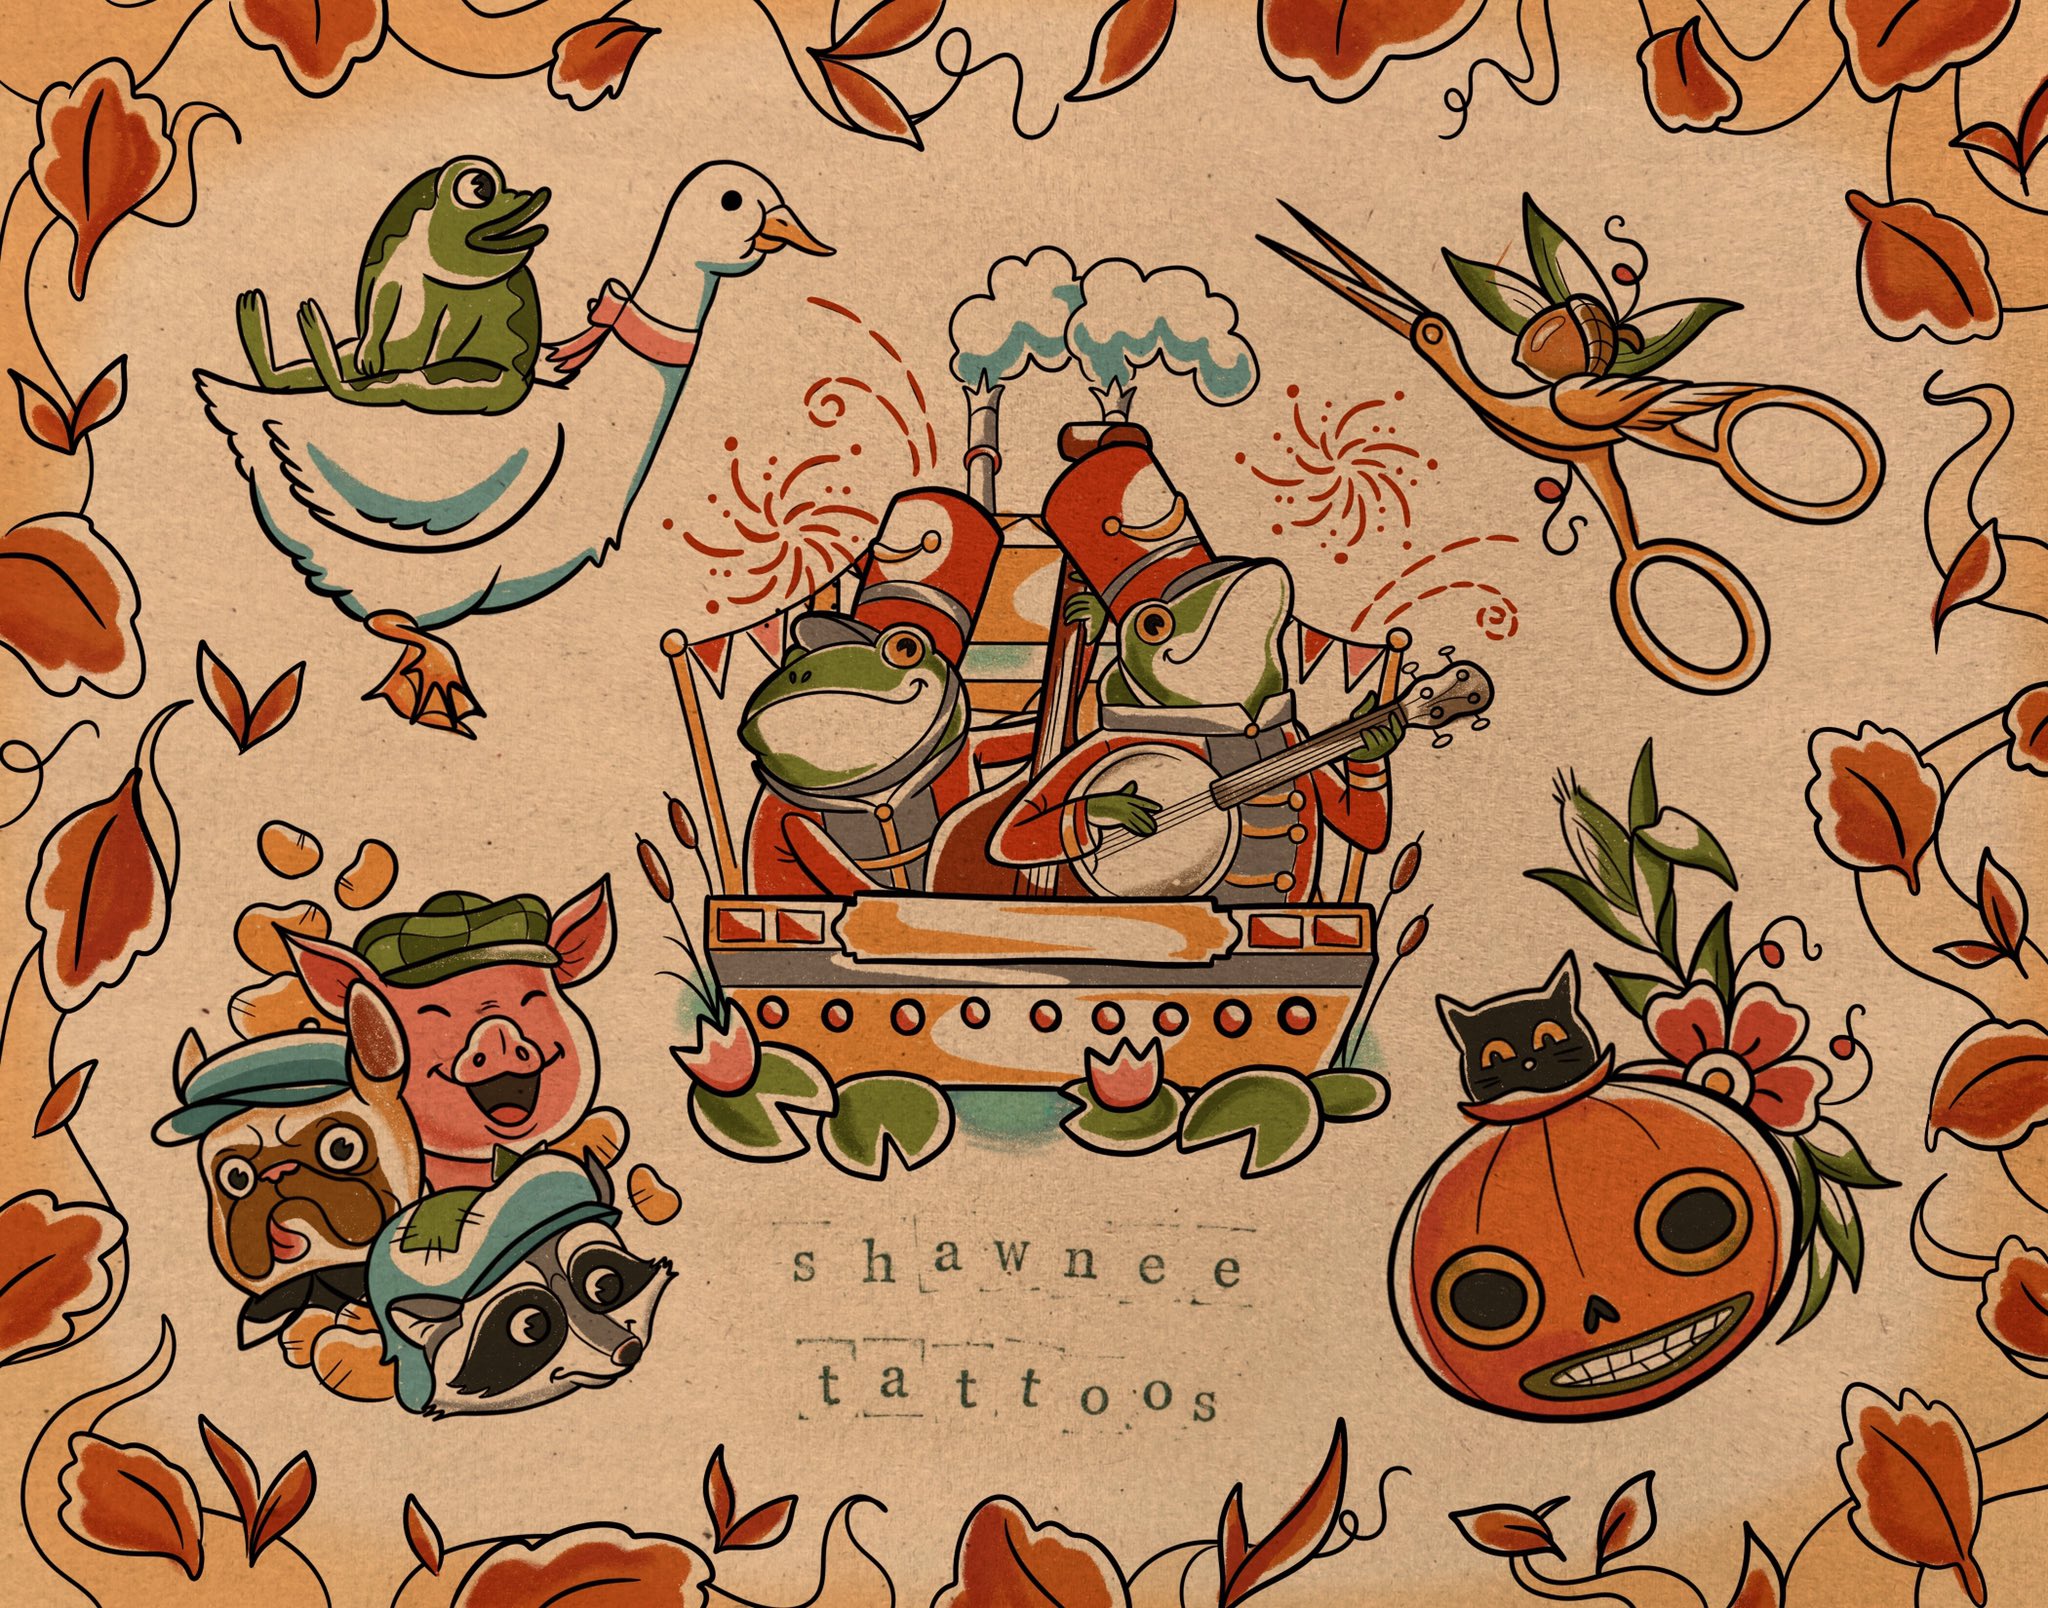 shawn Ⓥ on X: "Over the garden wall flash :) all are available to tattoo https://t.co/yHoDiK24TM" / X